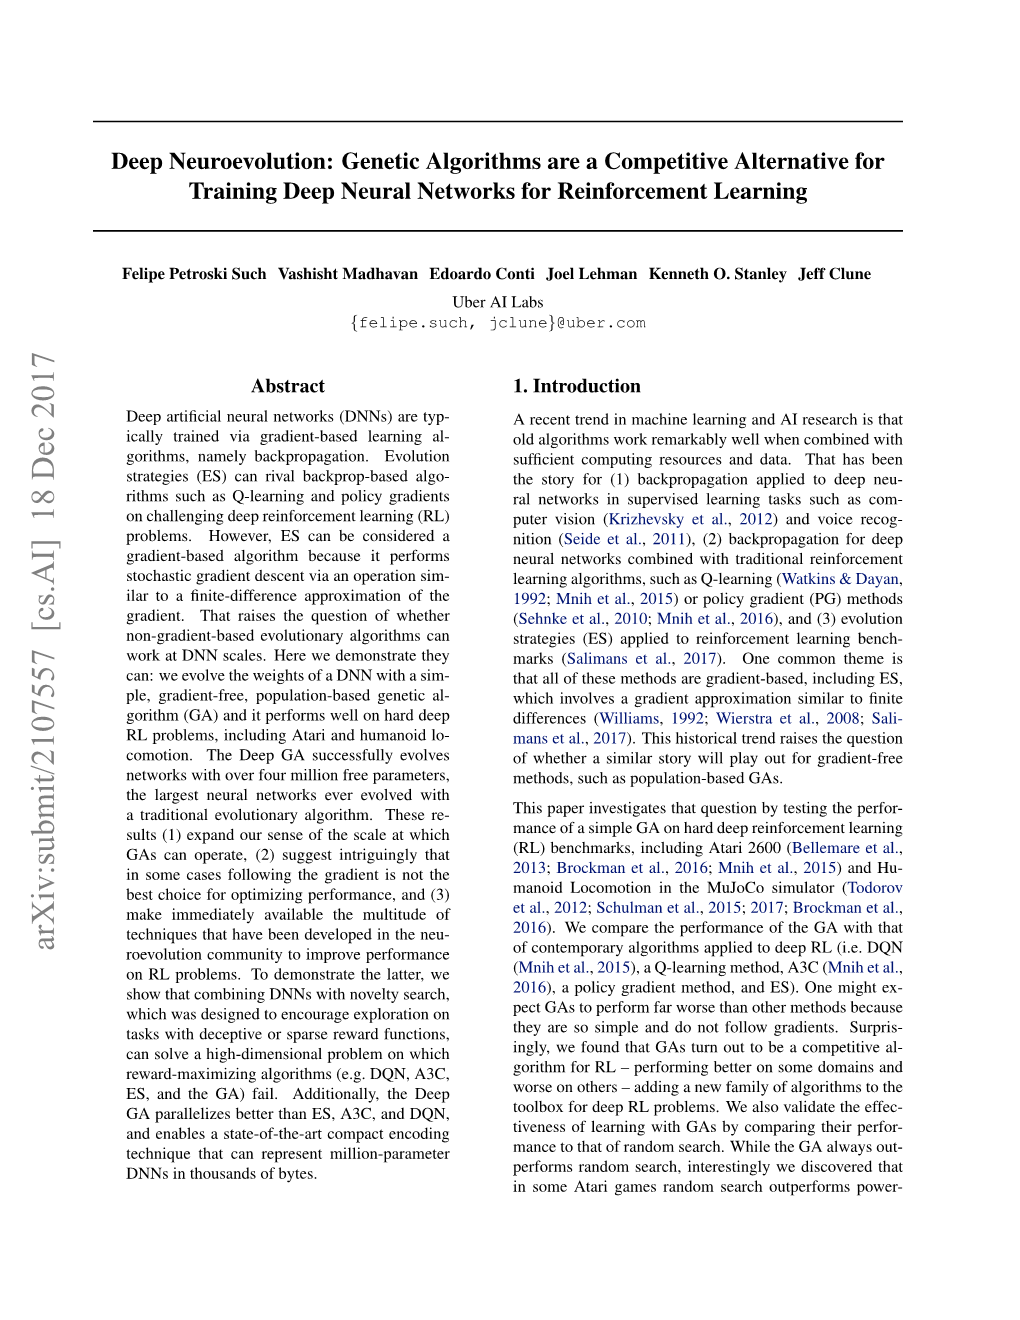 Genetic Algorithms Are a Competitive Alternative for Training Deep Neural Networks for Reinforcement Learning